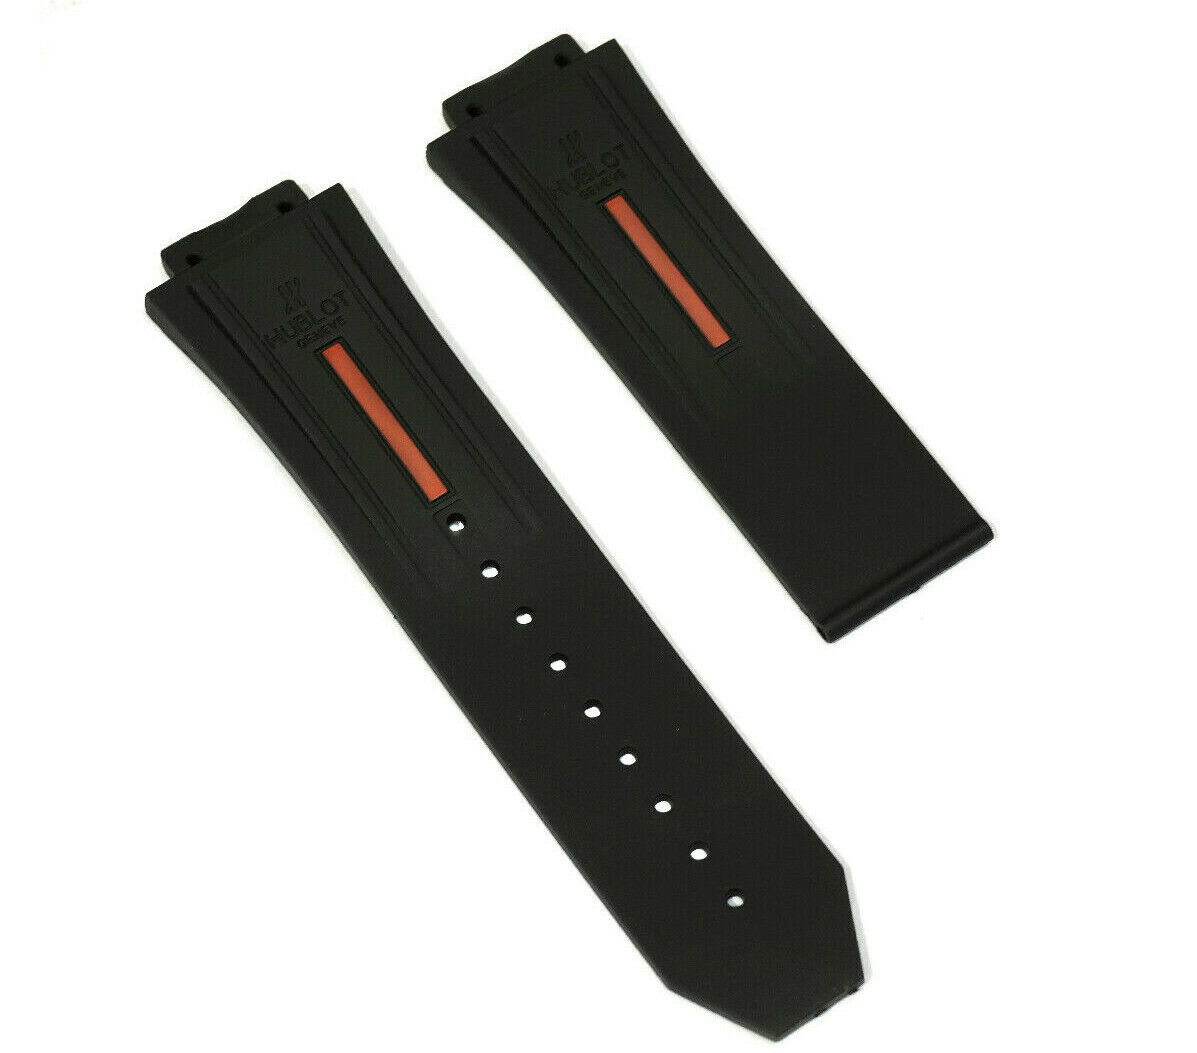 New Silicone Rubber Replacement Watch Band Strap For (Fits) F1 Hublot King...